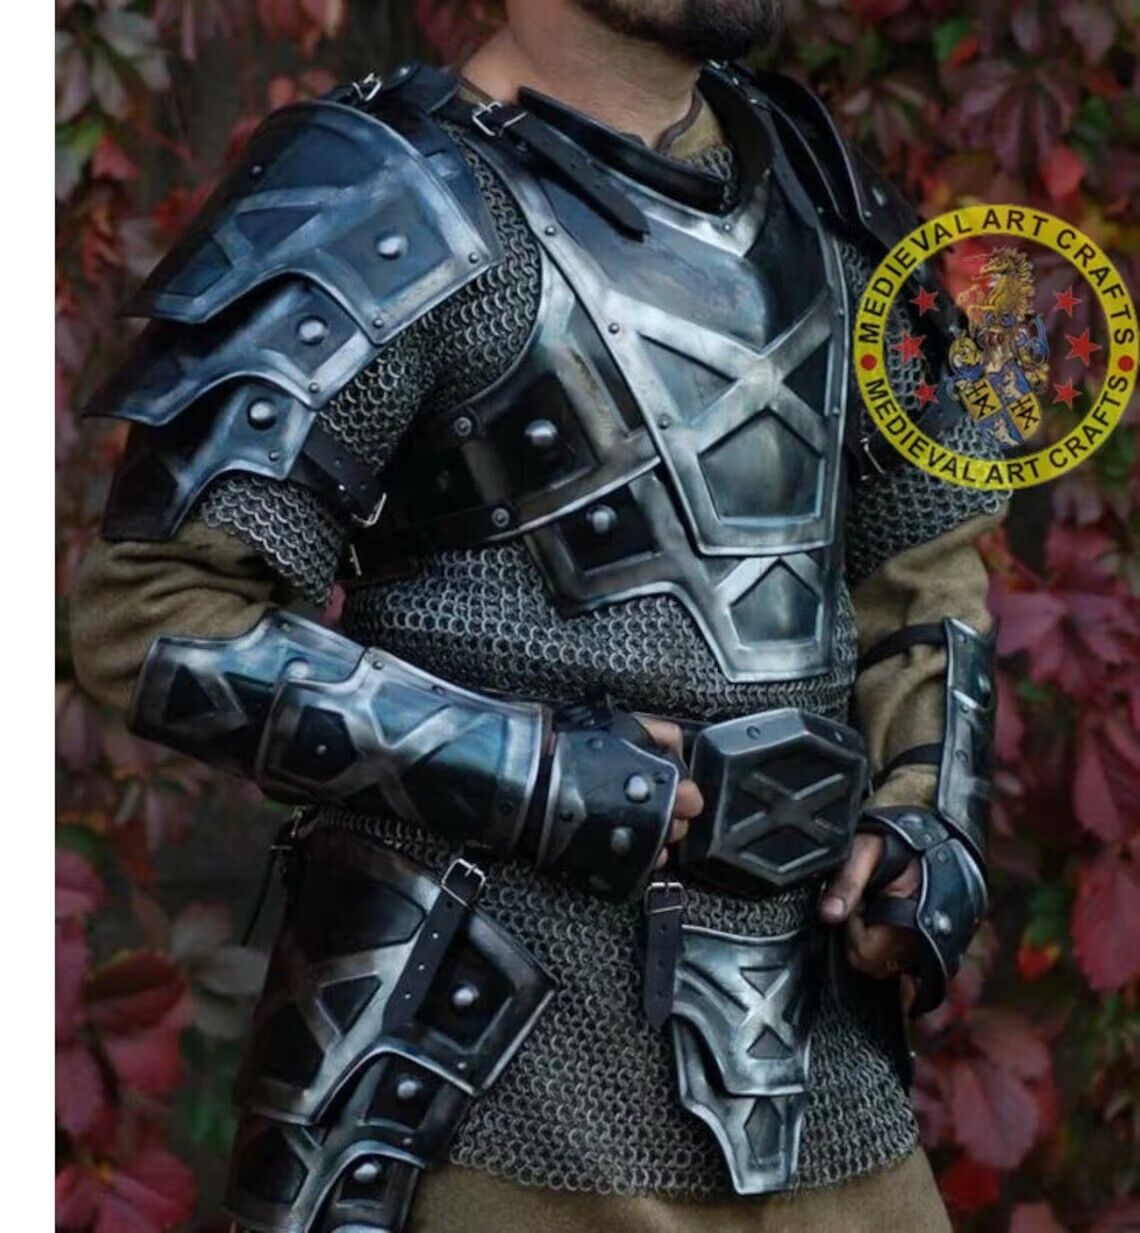 Medieval Dwarven Antique finishing Armor Cosplay, Sca, Larp Armor Christmas Gift